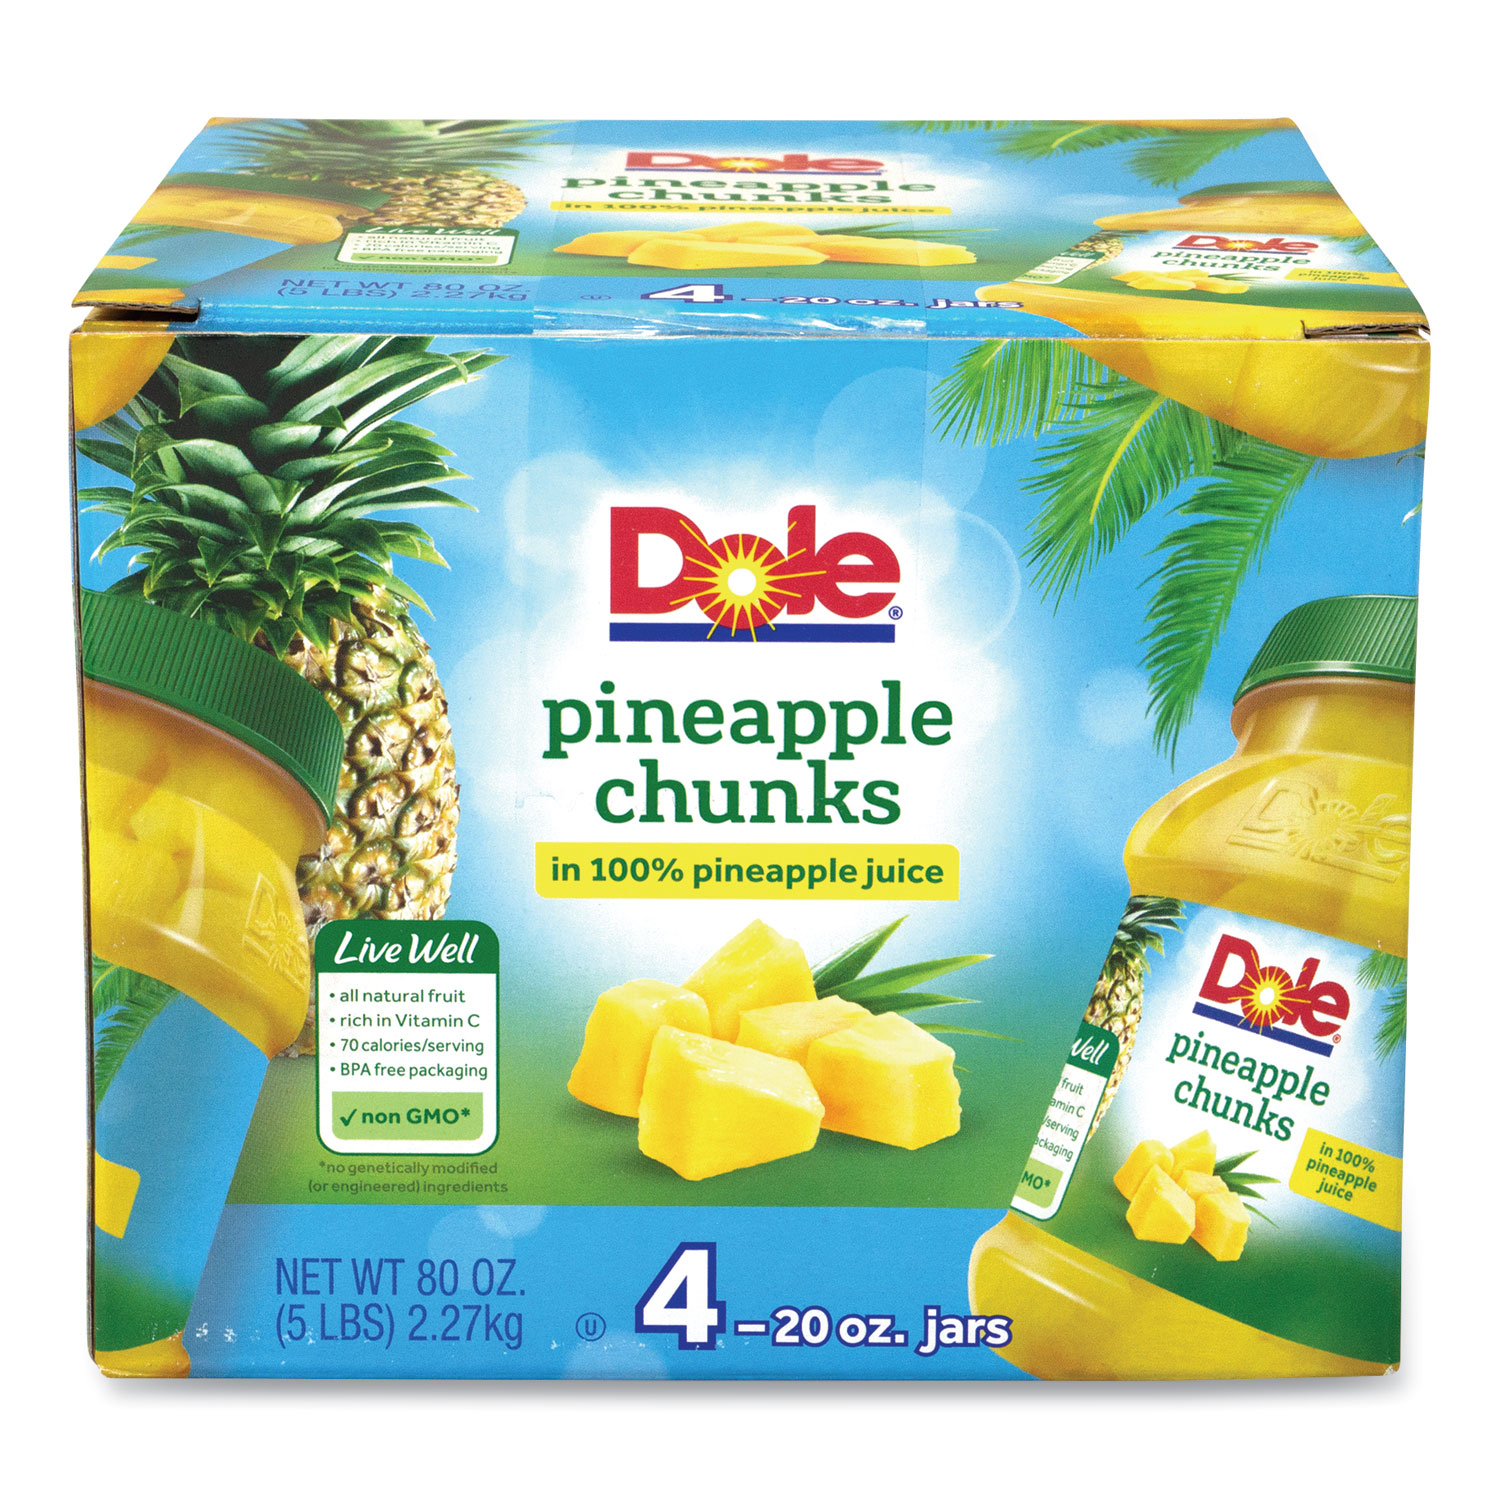  Dole 74048 Pineapple Chunks in 100% Juice, 20 oz Jar, 4 Jars/Box, Free Delivery in 1-4 Business Days (GRR90000165) 